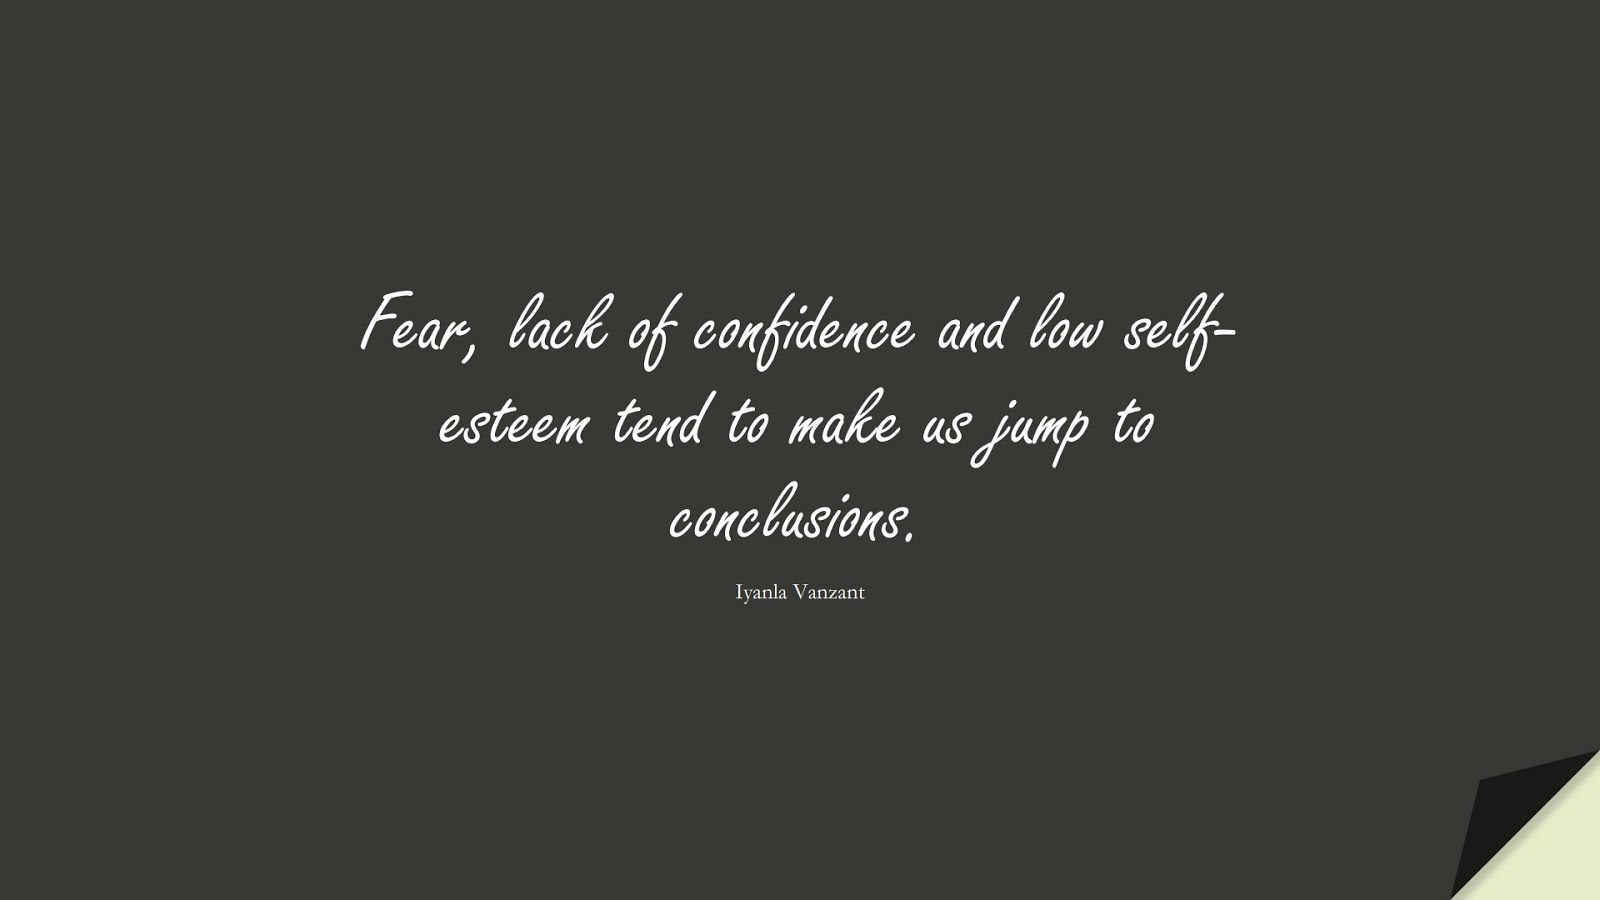 Fear, lack of confidence and low self-esteem tend to make us jump to conclusions. (Iyanla Vanzant);  #SelfEsteemQuotes